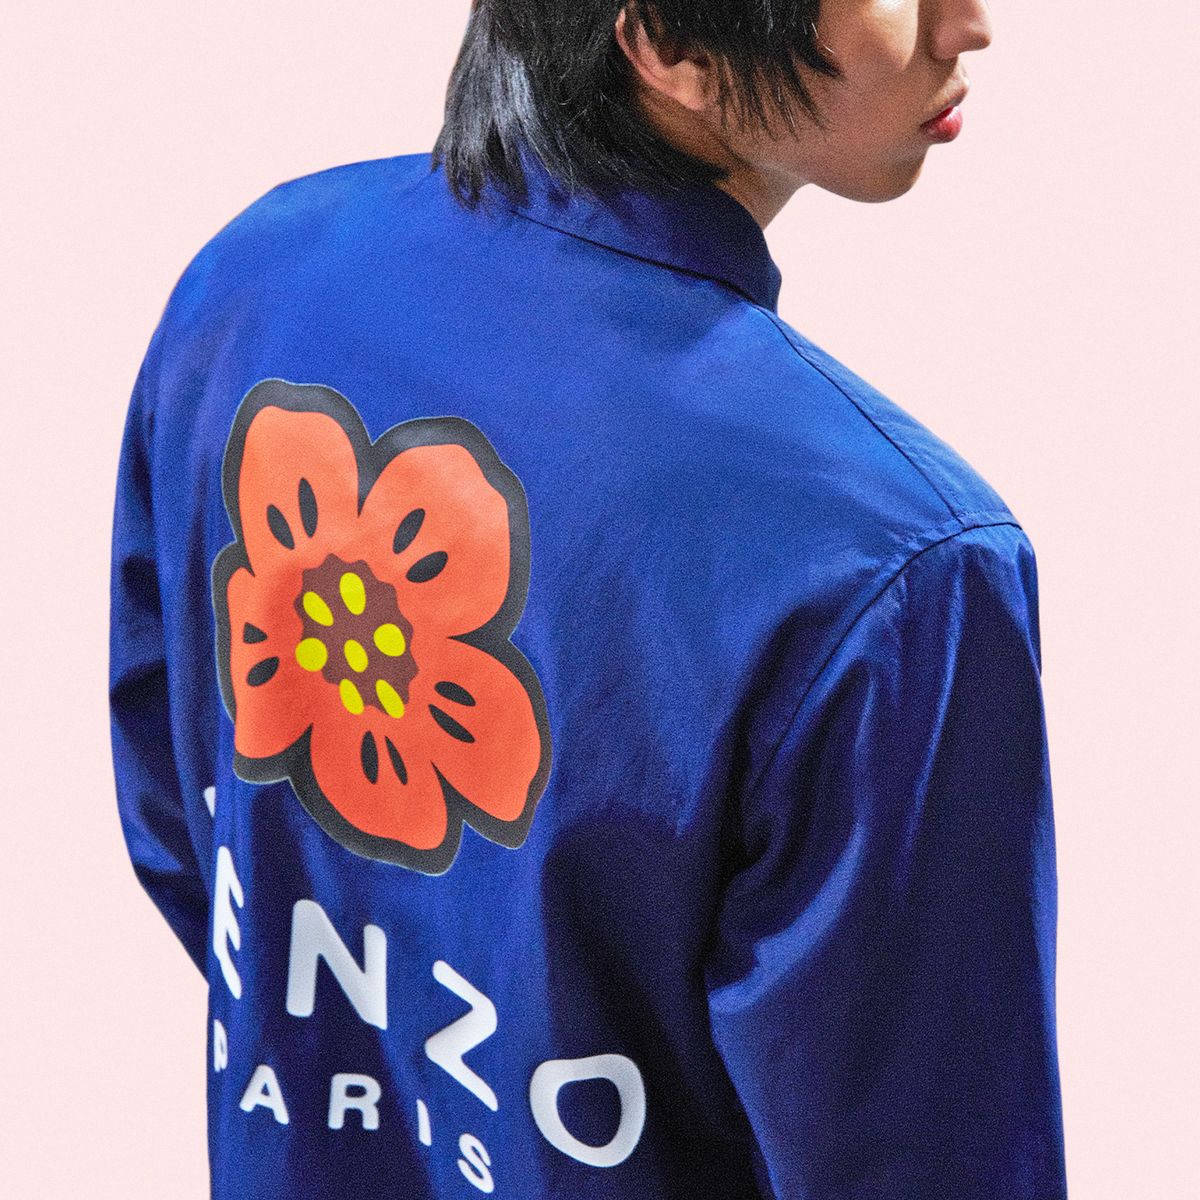 KENZO - KENZO's first Japanese denim collection by Nigo available now KENZO.COM